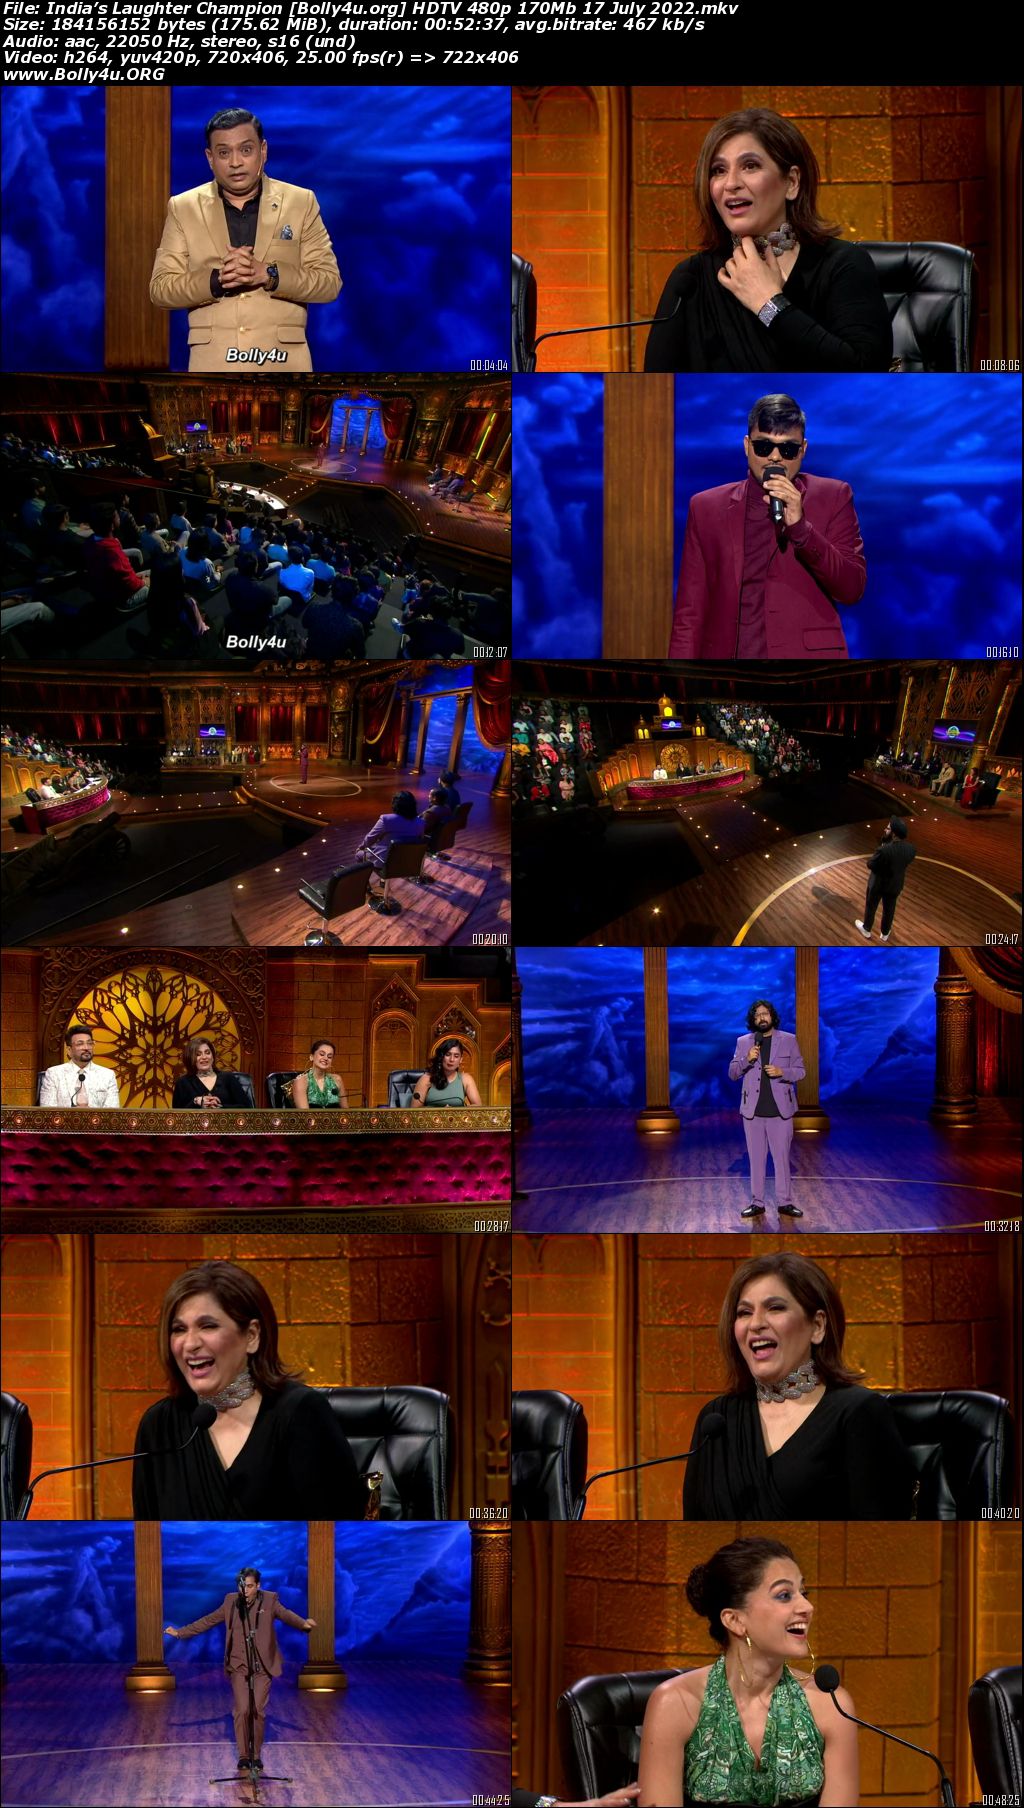 Indias Laughter Champion HDTV 480p 170Mb 17 July 2022 Download